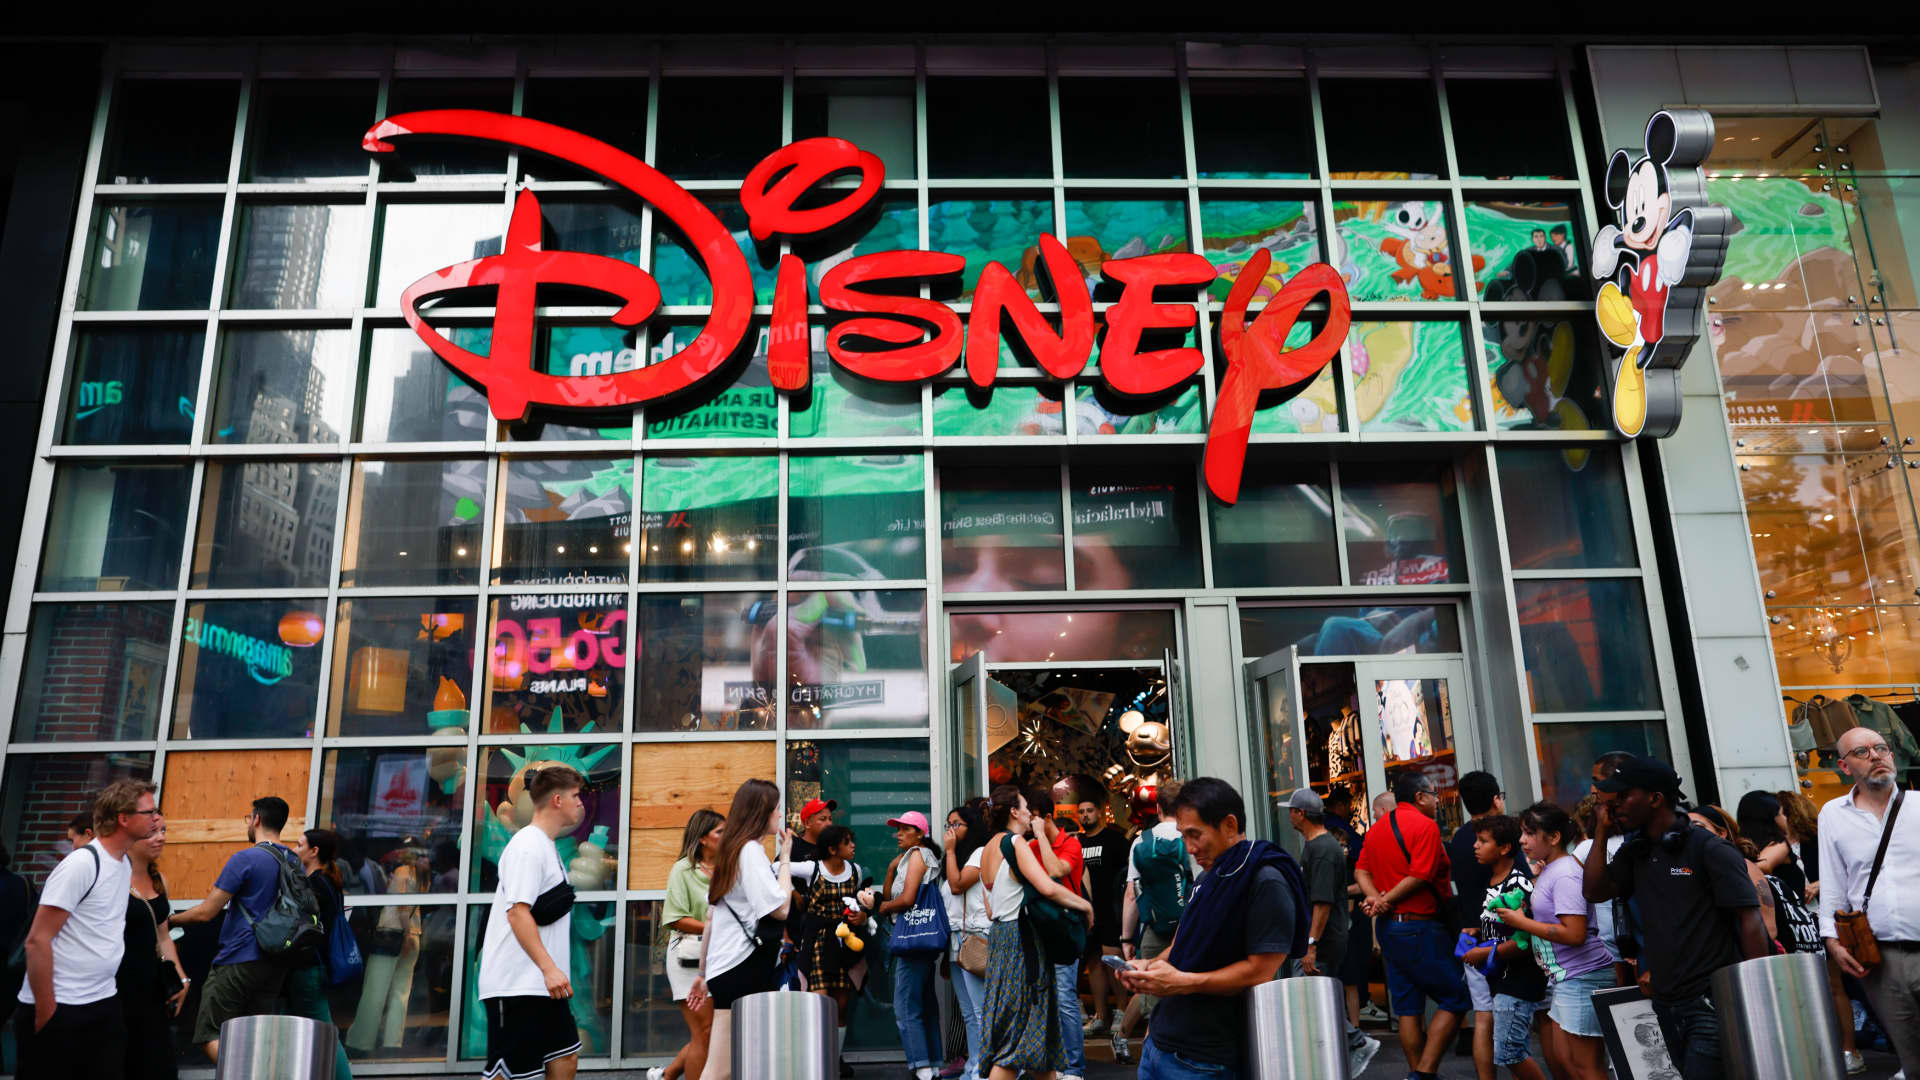 Club name Disney’s dispute with Charter is bad news for both companies